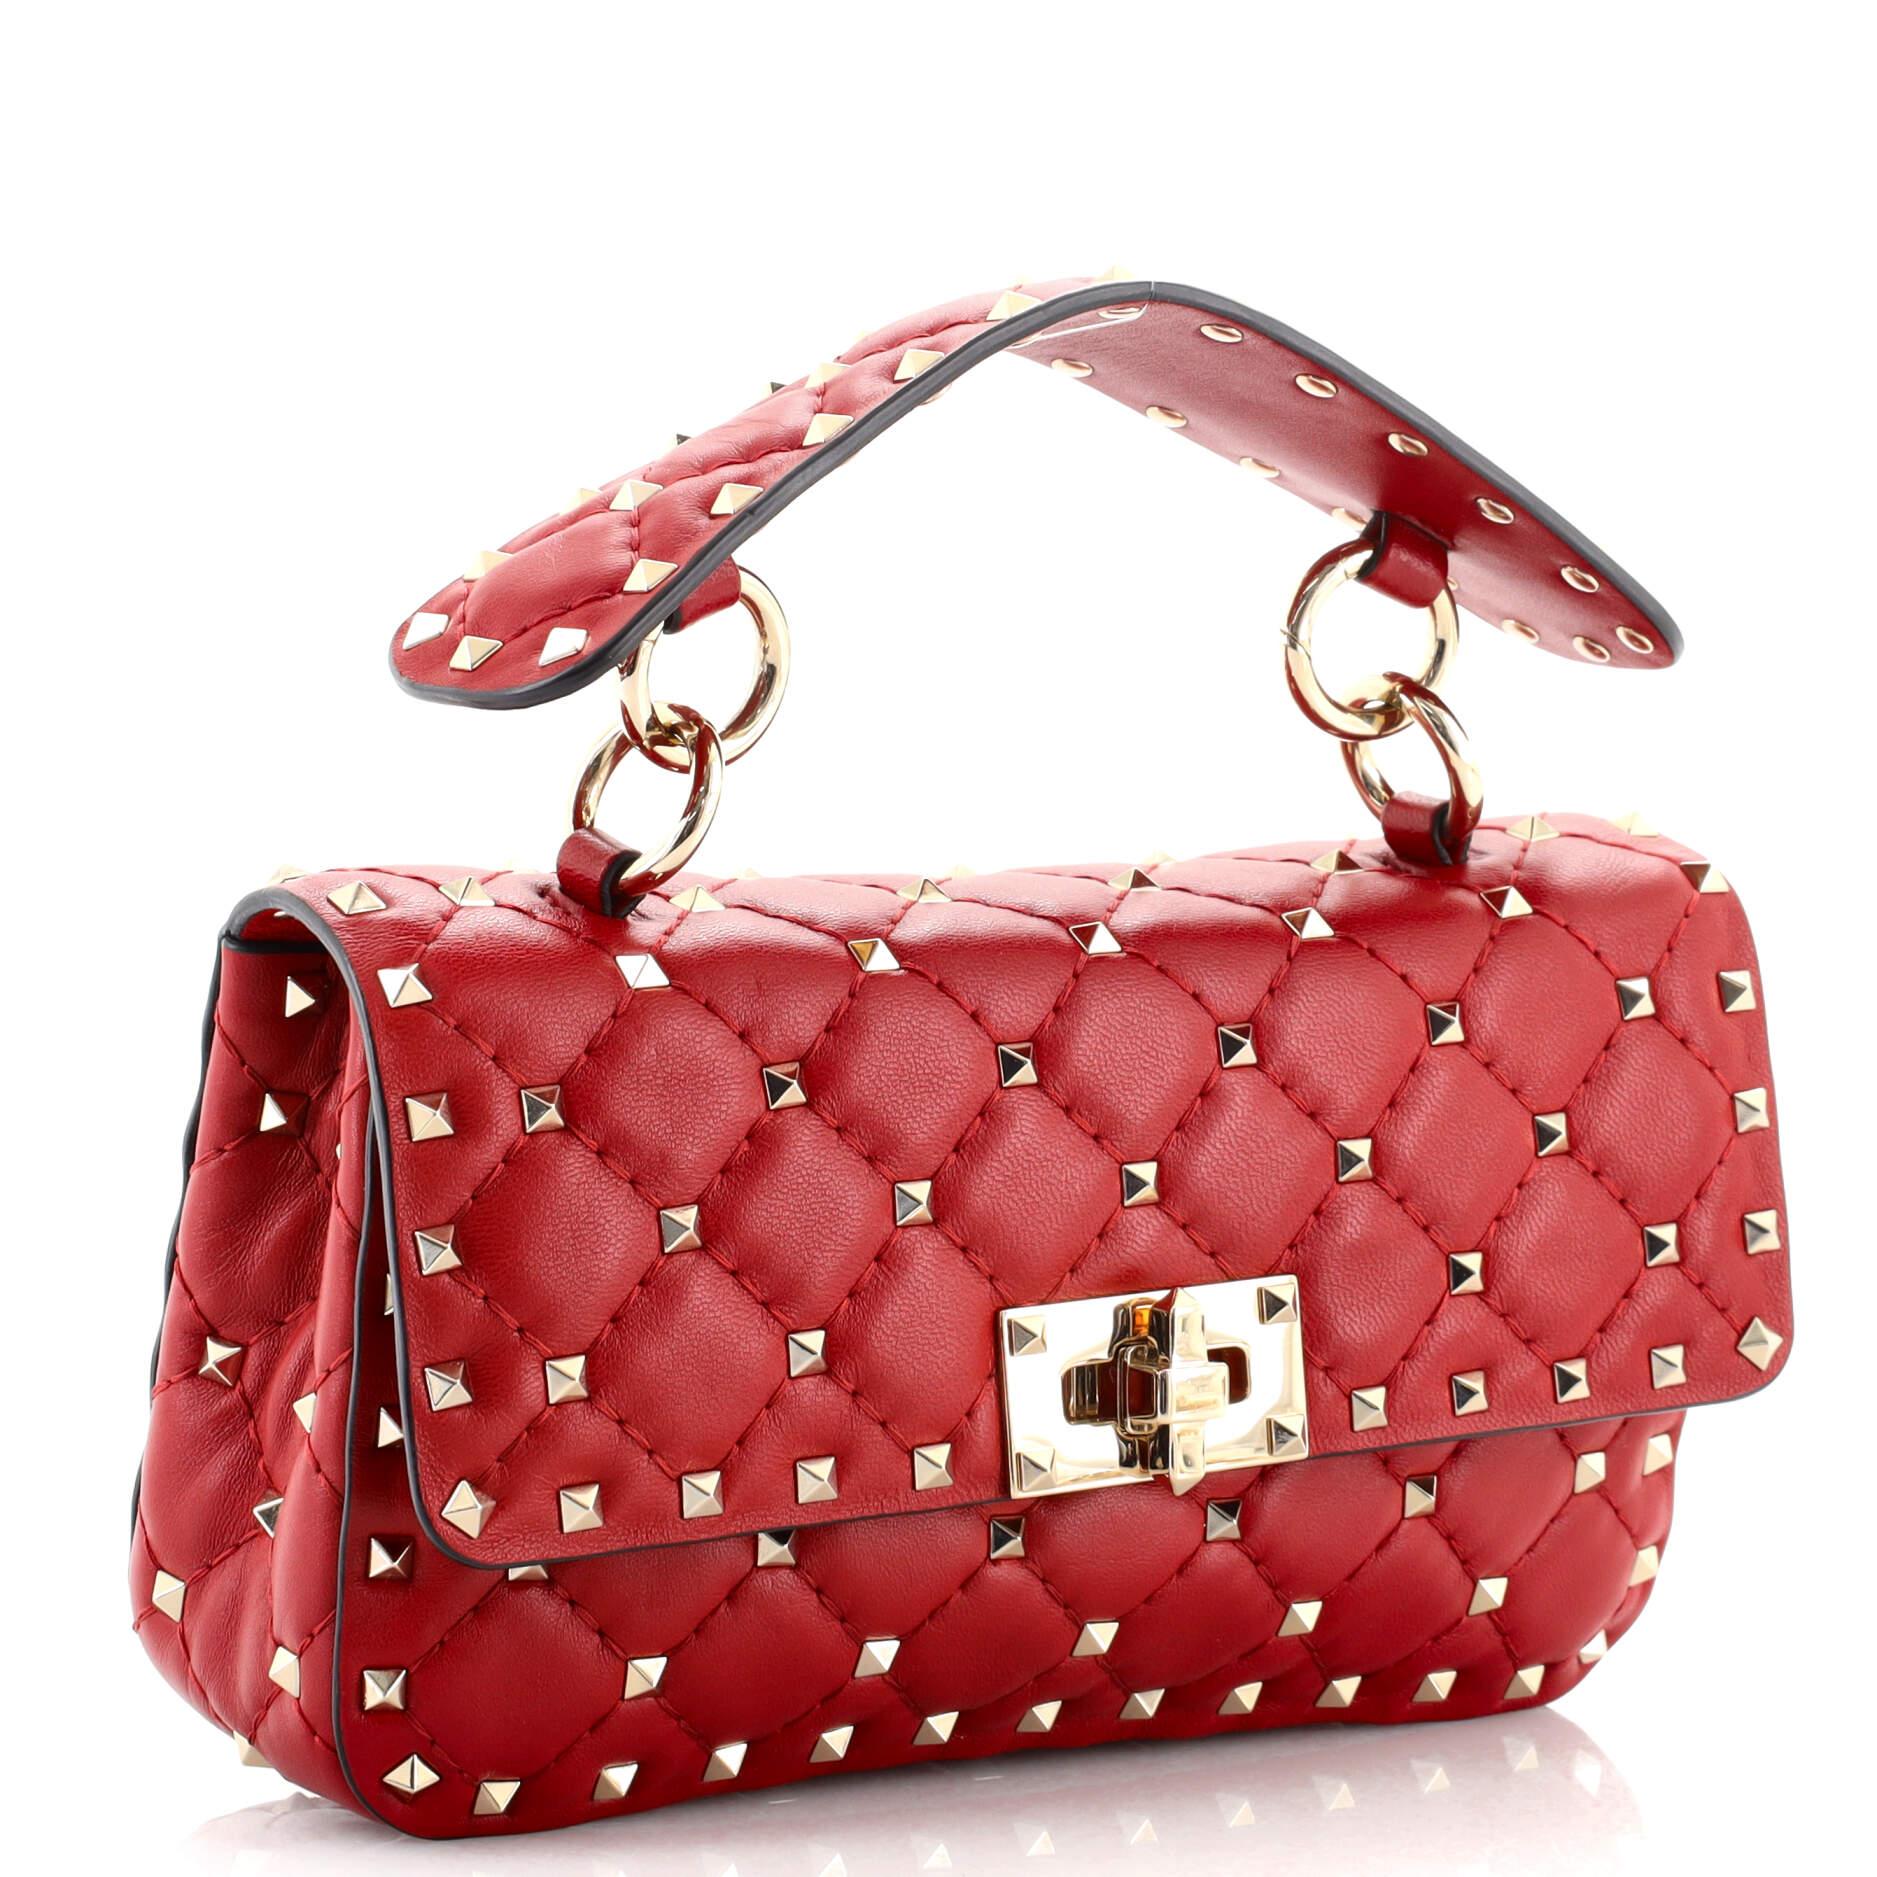 Red Valentino Rockstud Spike Flap Bag Quilted Leather Small